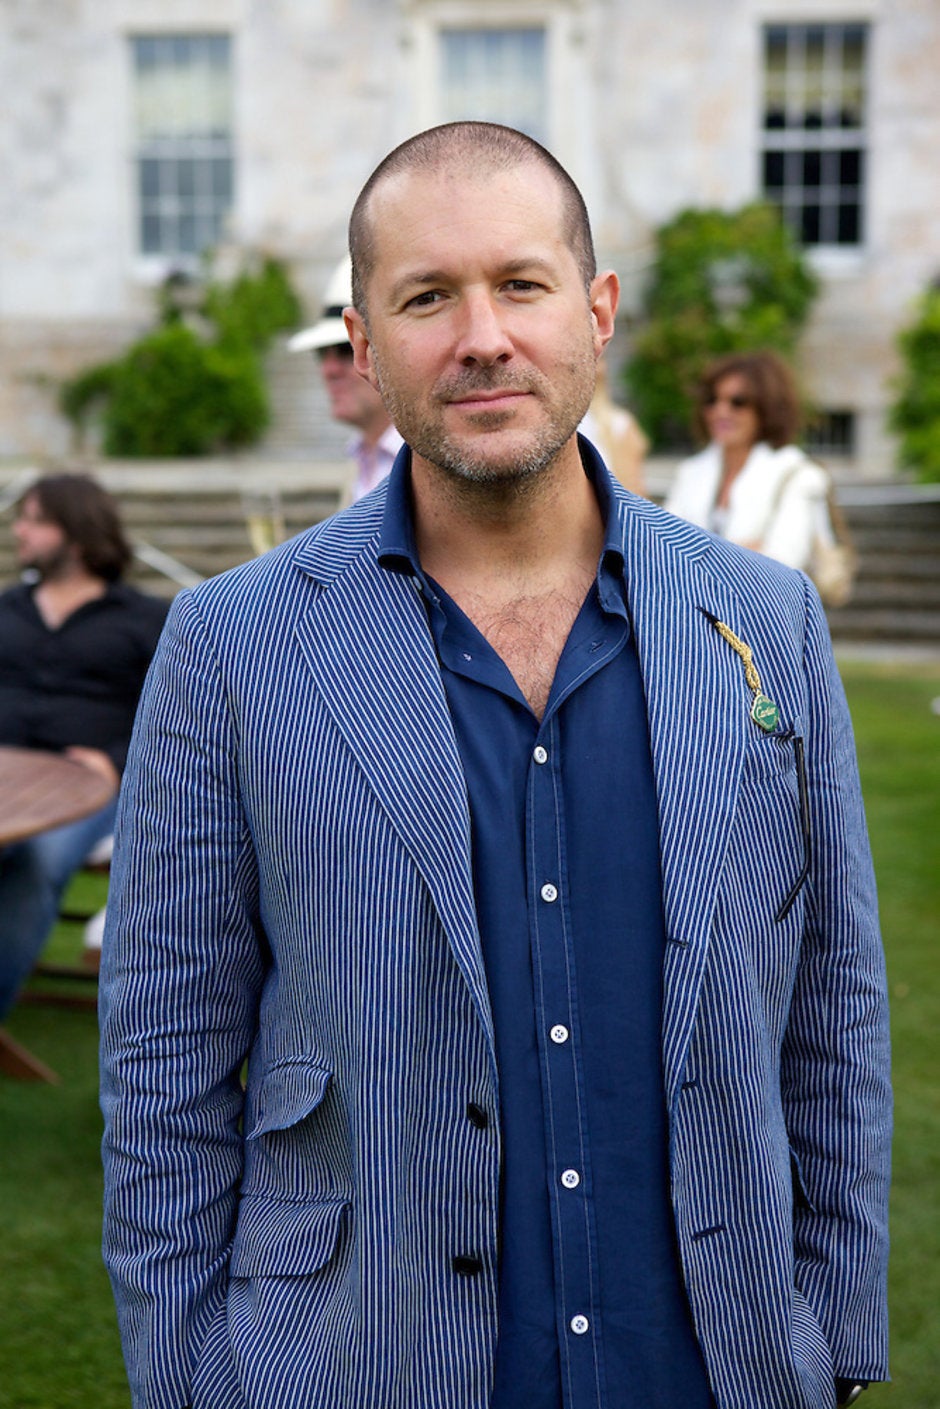 Jony Ive was the mastermind behind the Apple Watch - Apple Watch first-year sales were a failure: 10 million units sold, while Apple had planned for 40 mil